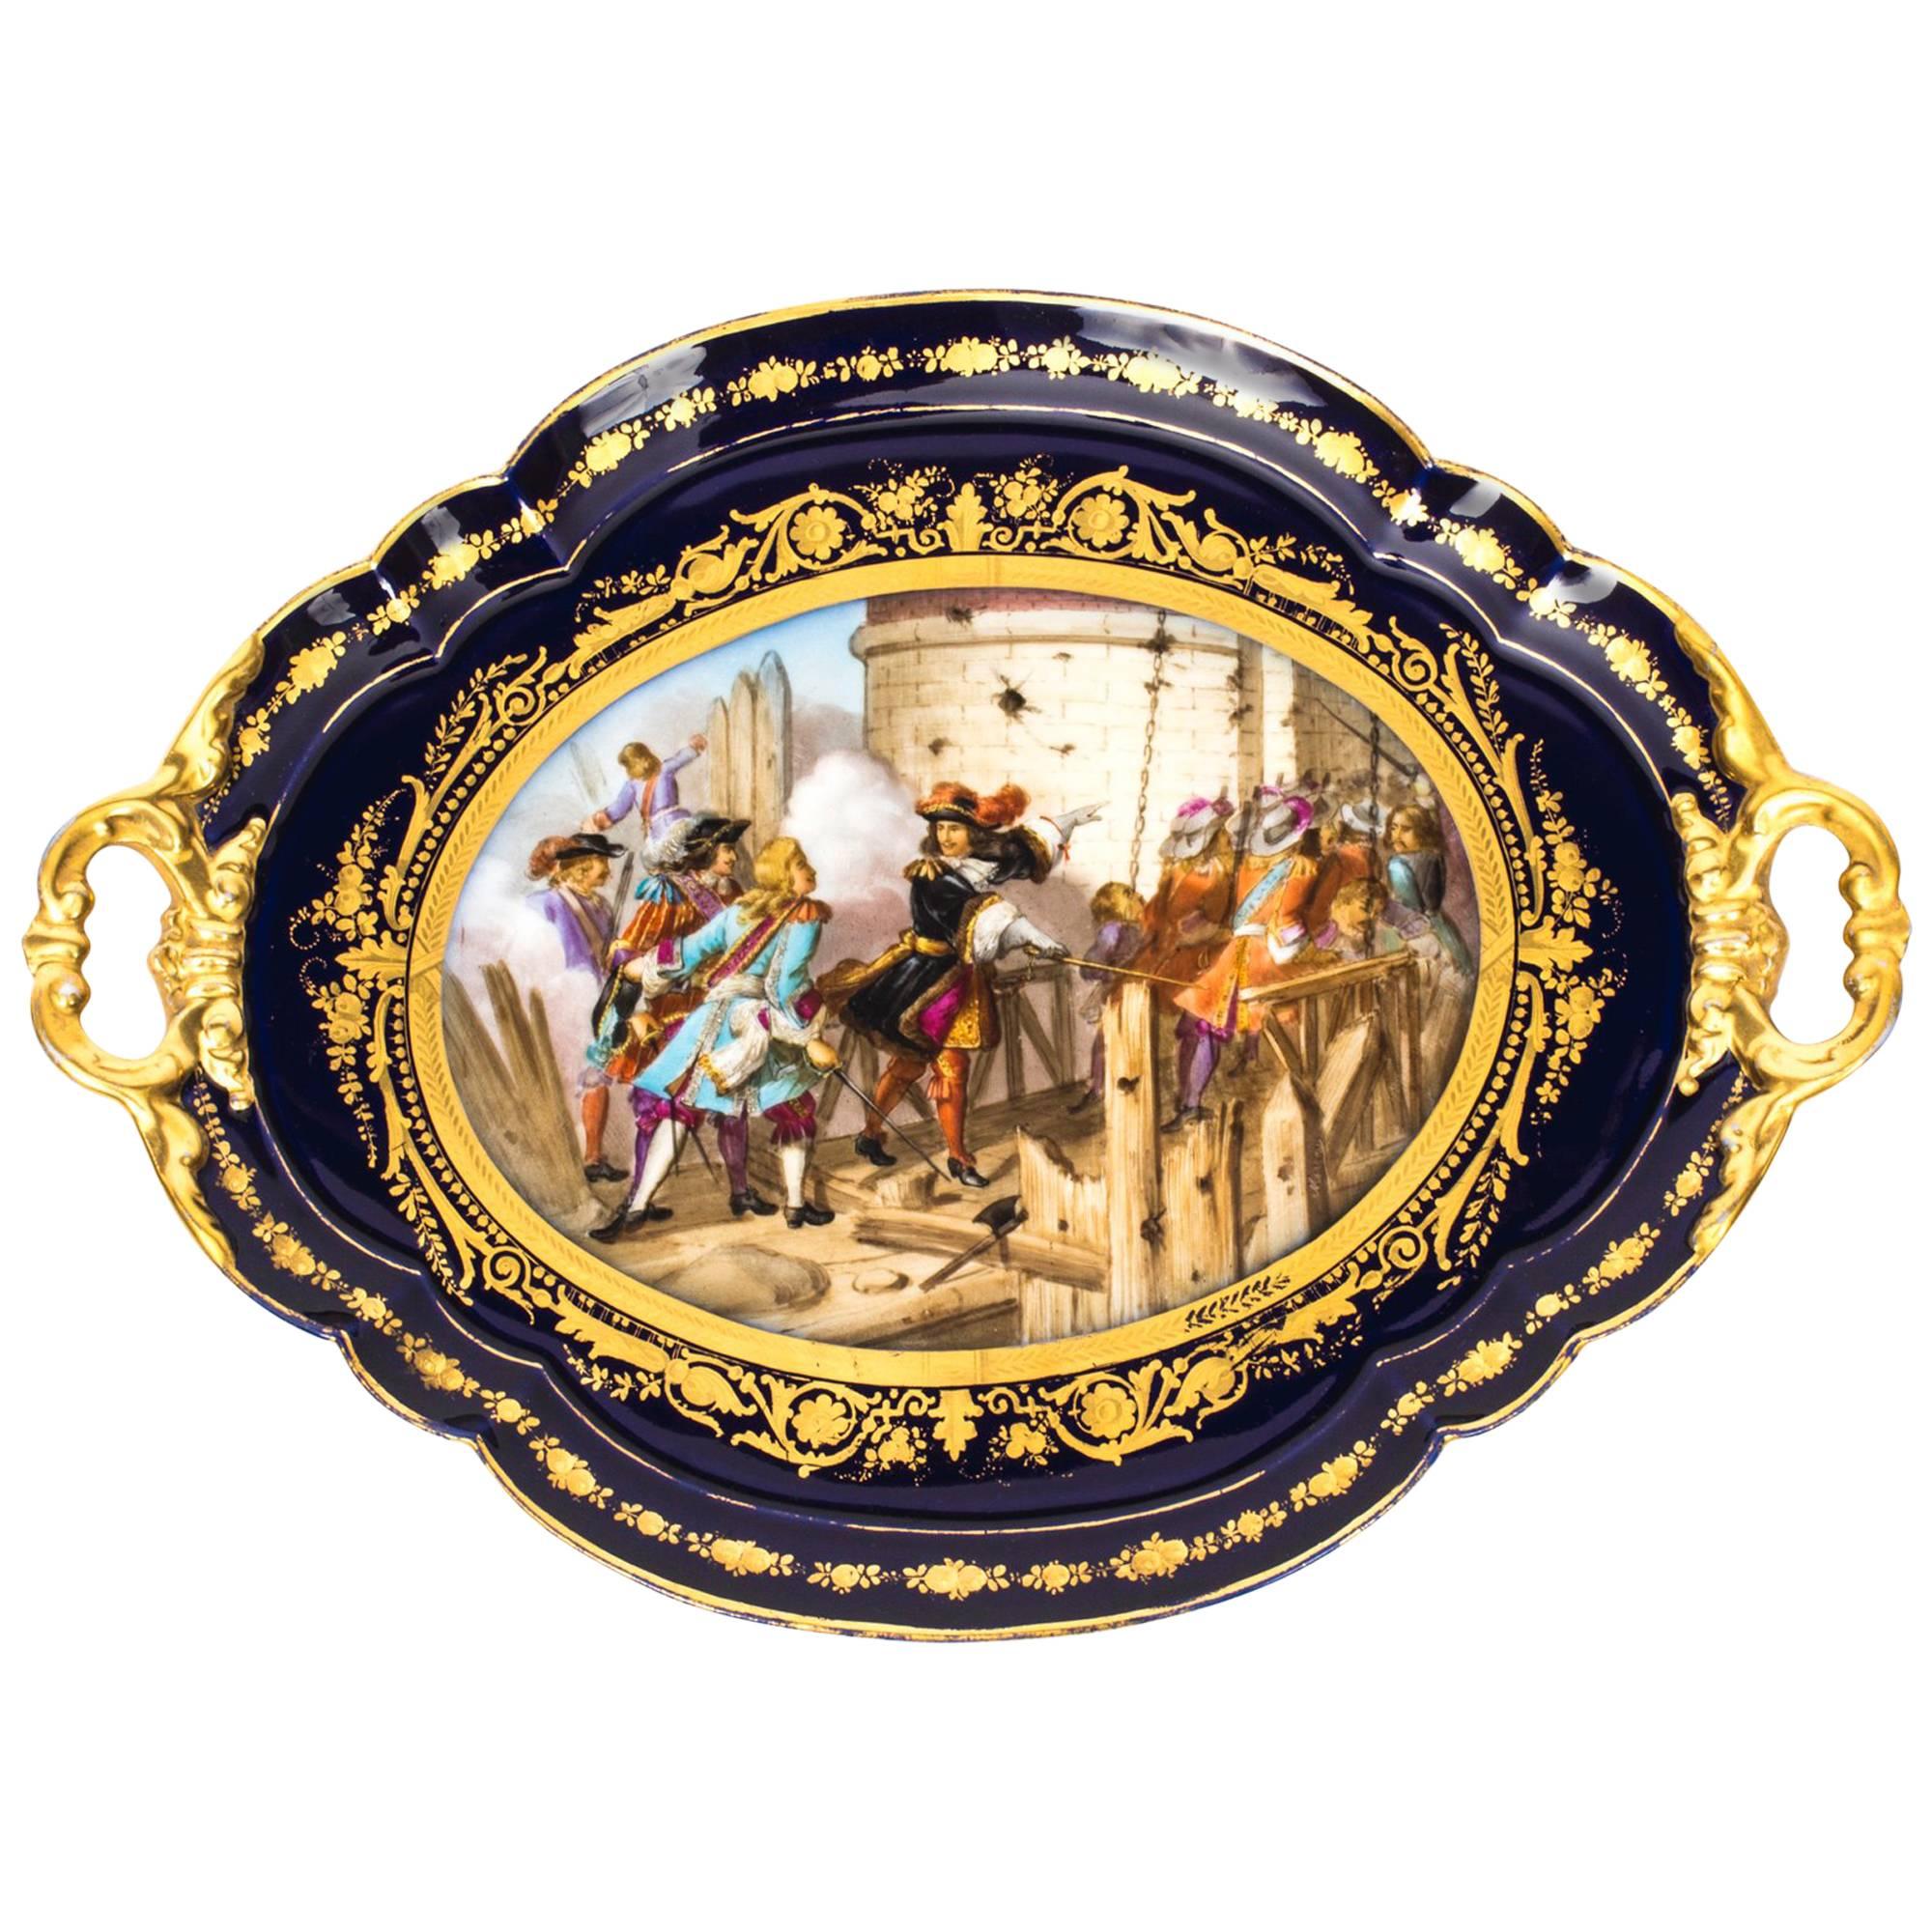 19th Century French Sevres Porcelain Tray Signed Moreaux